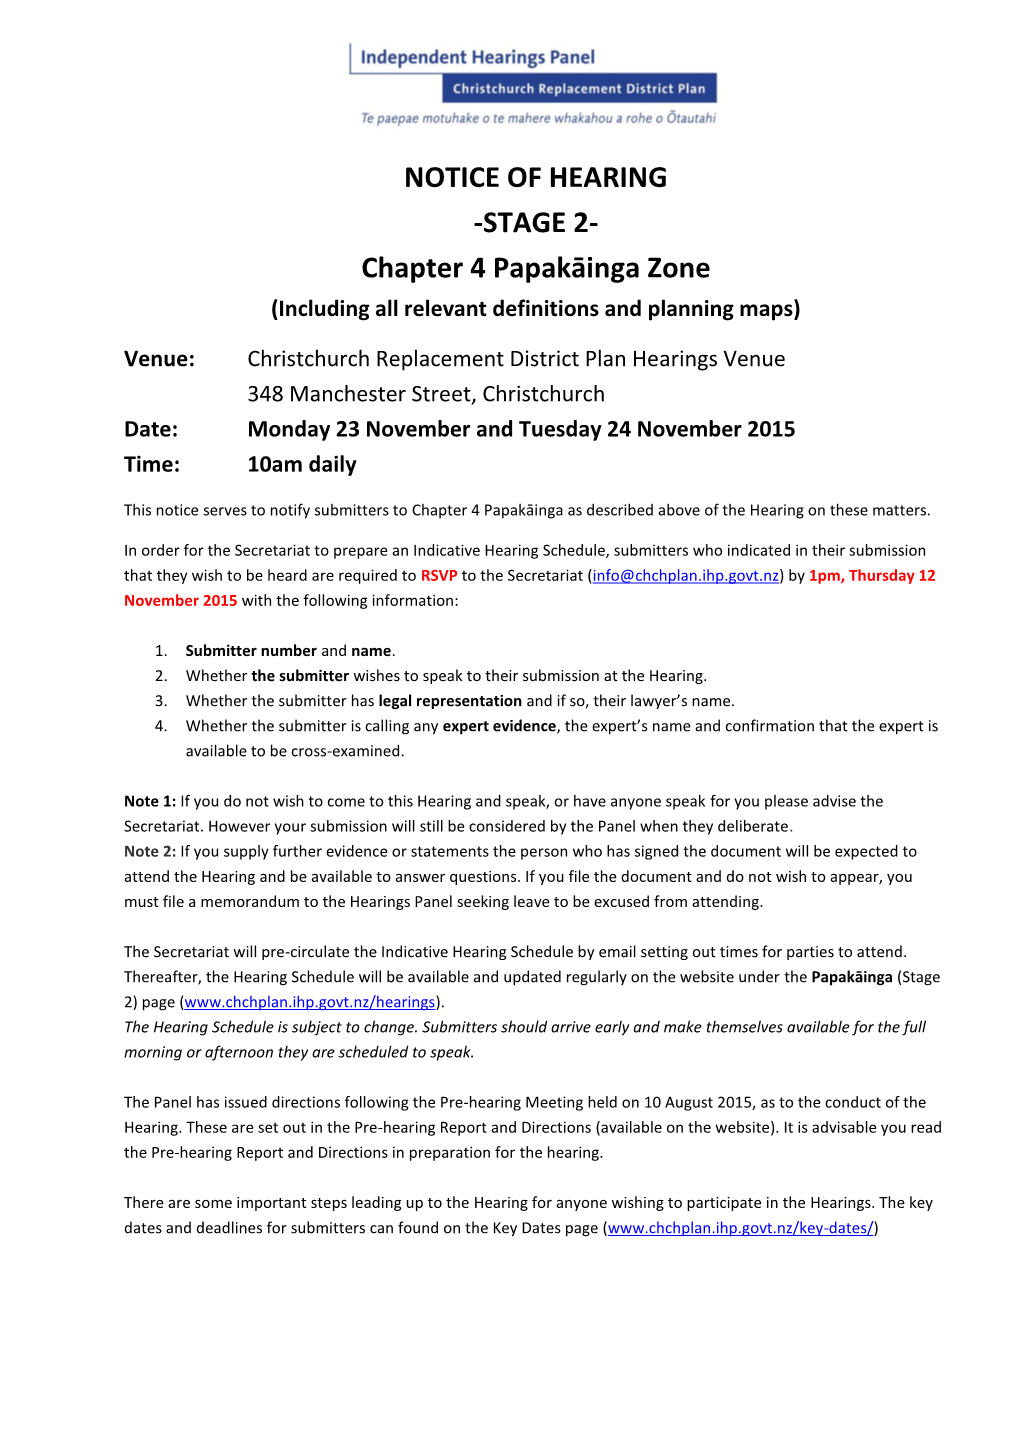 NOTICE of HEARING -STAGE 2- Chapter 4 Papakāinga Zone (Including All Relevant Definitions and Planning Maps)